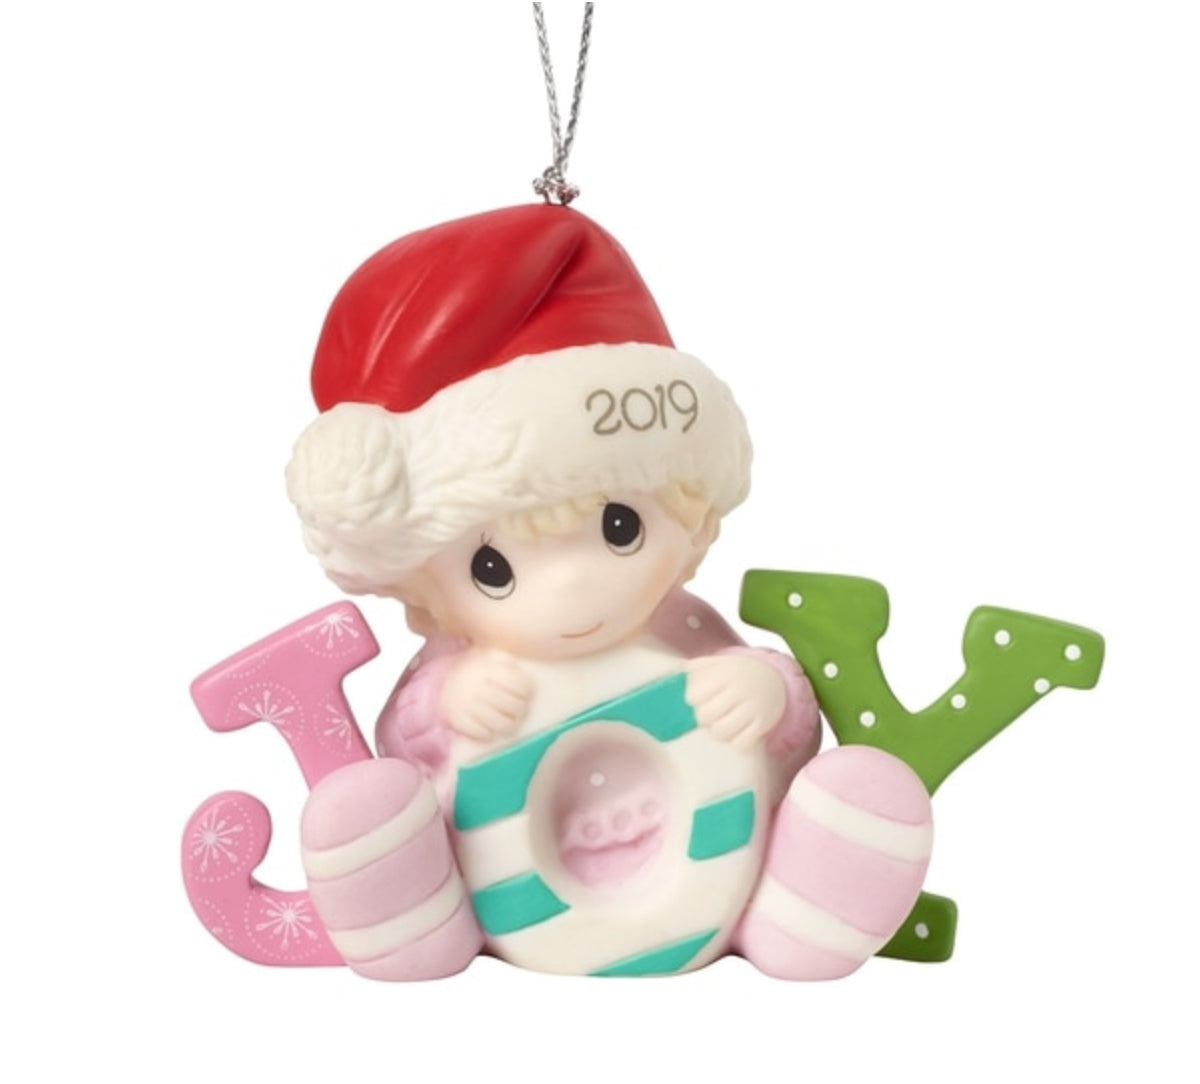 Baby's First Christmas 2019 (Girl) -  Precious Moment Ornament